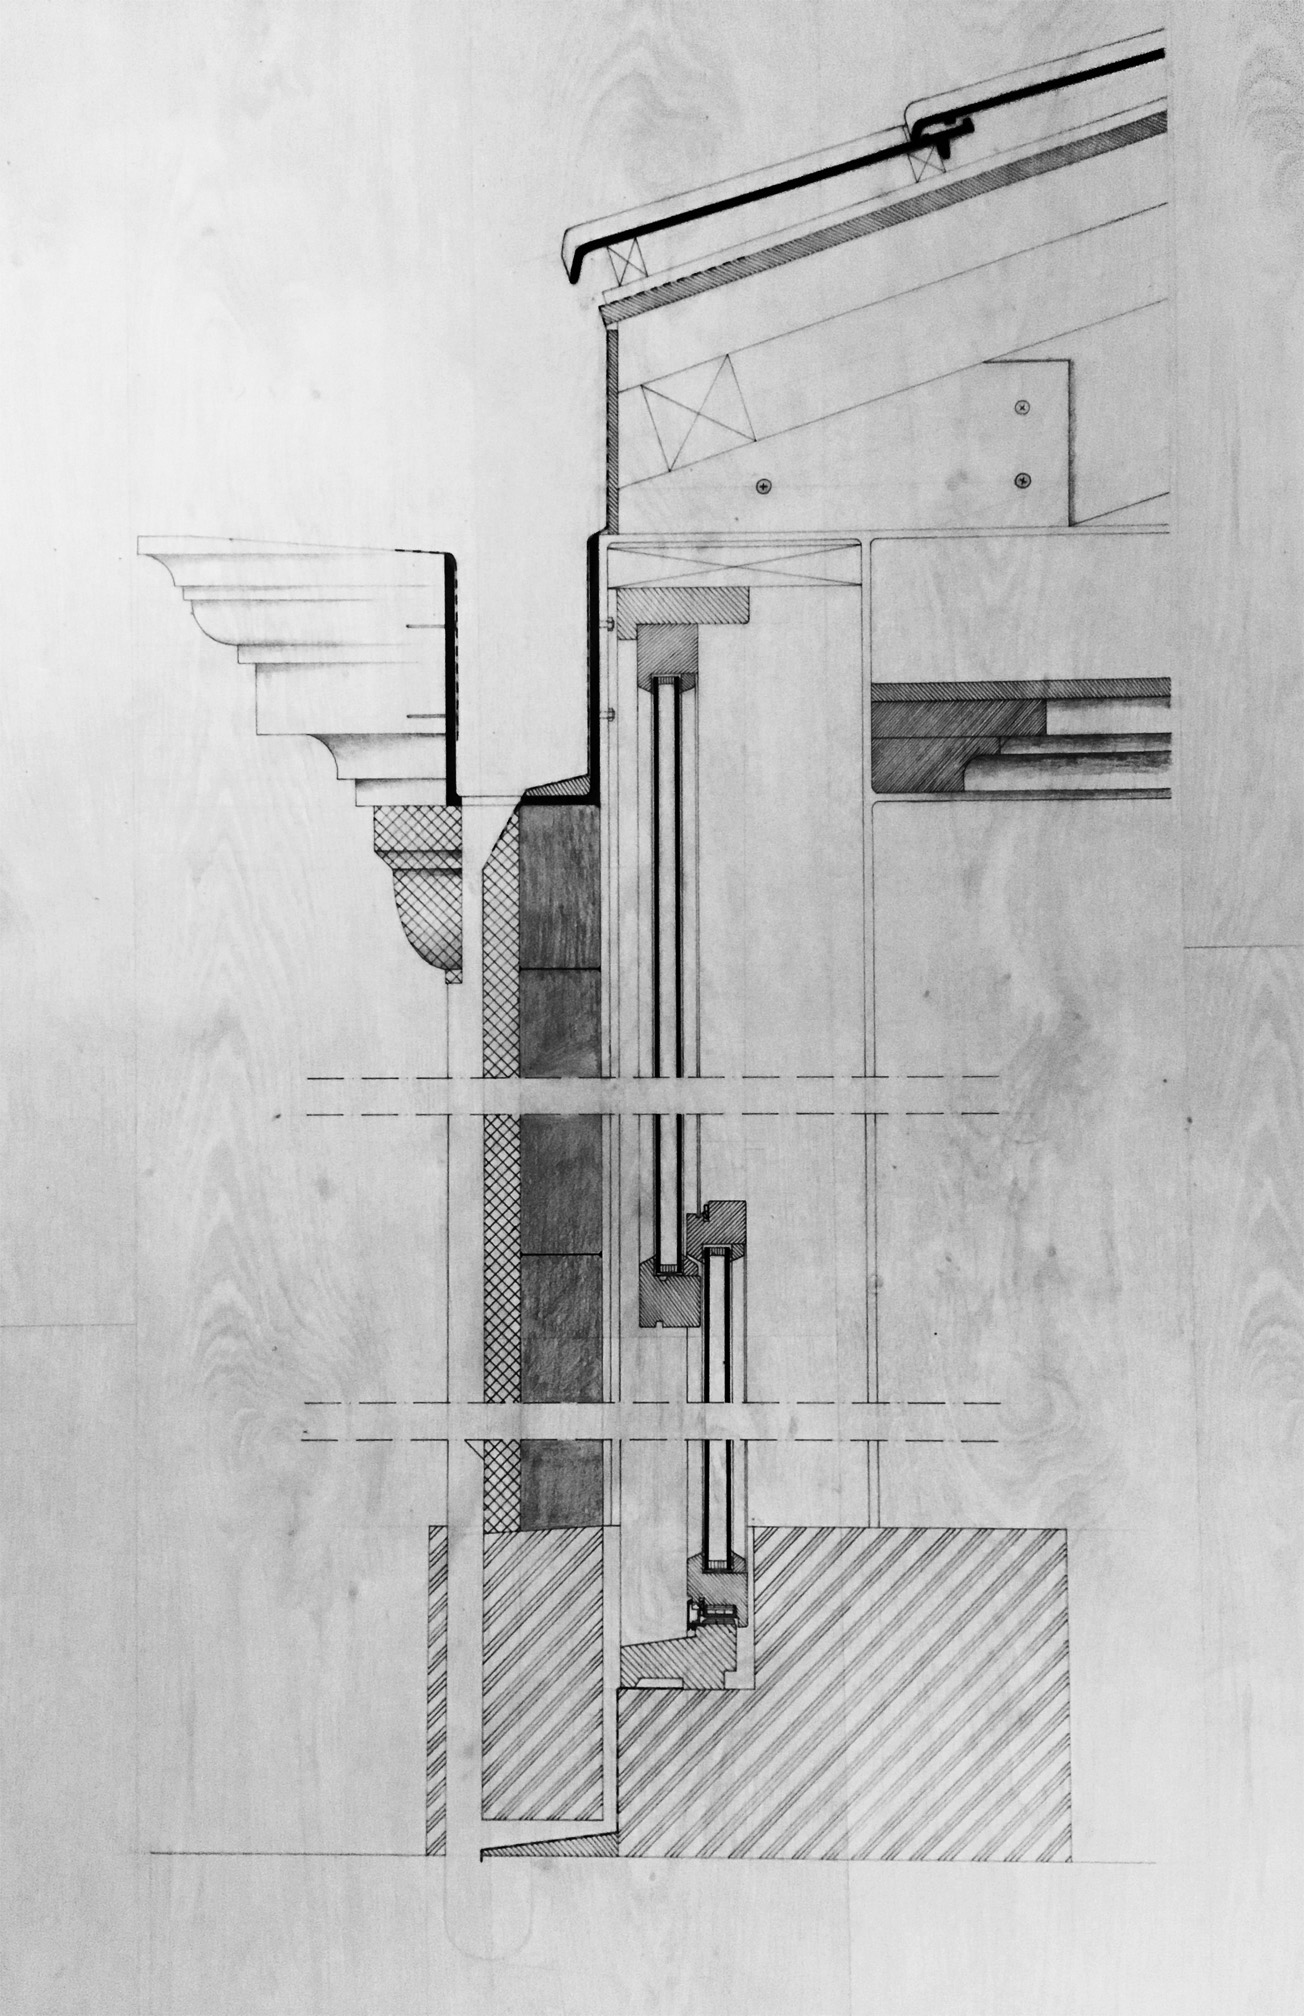 Construction detail foundation-window-column-roof, vertical section, scale 1:2, pencil and pen on tracing paper